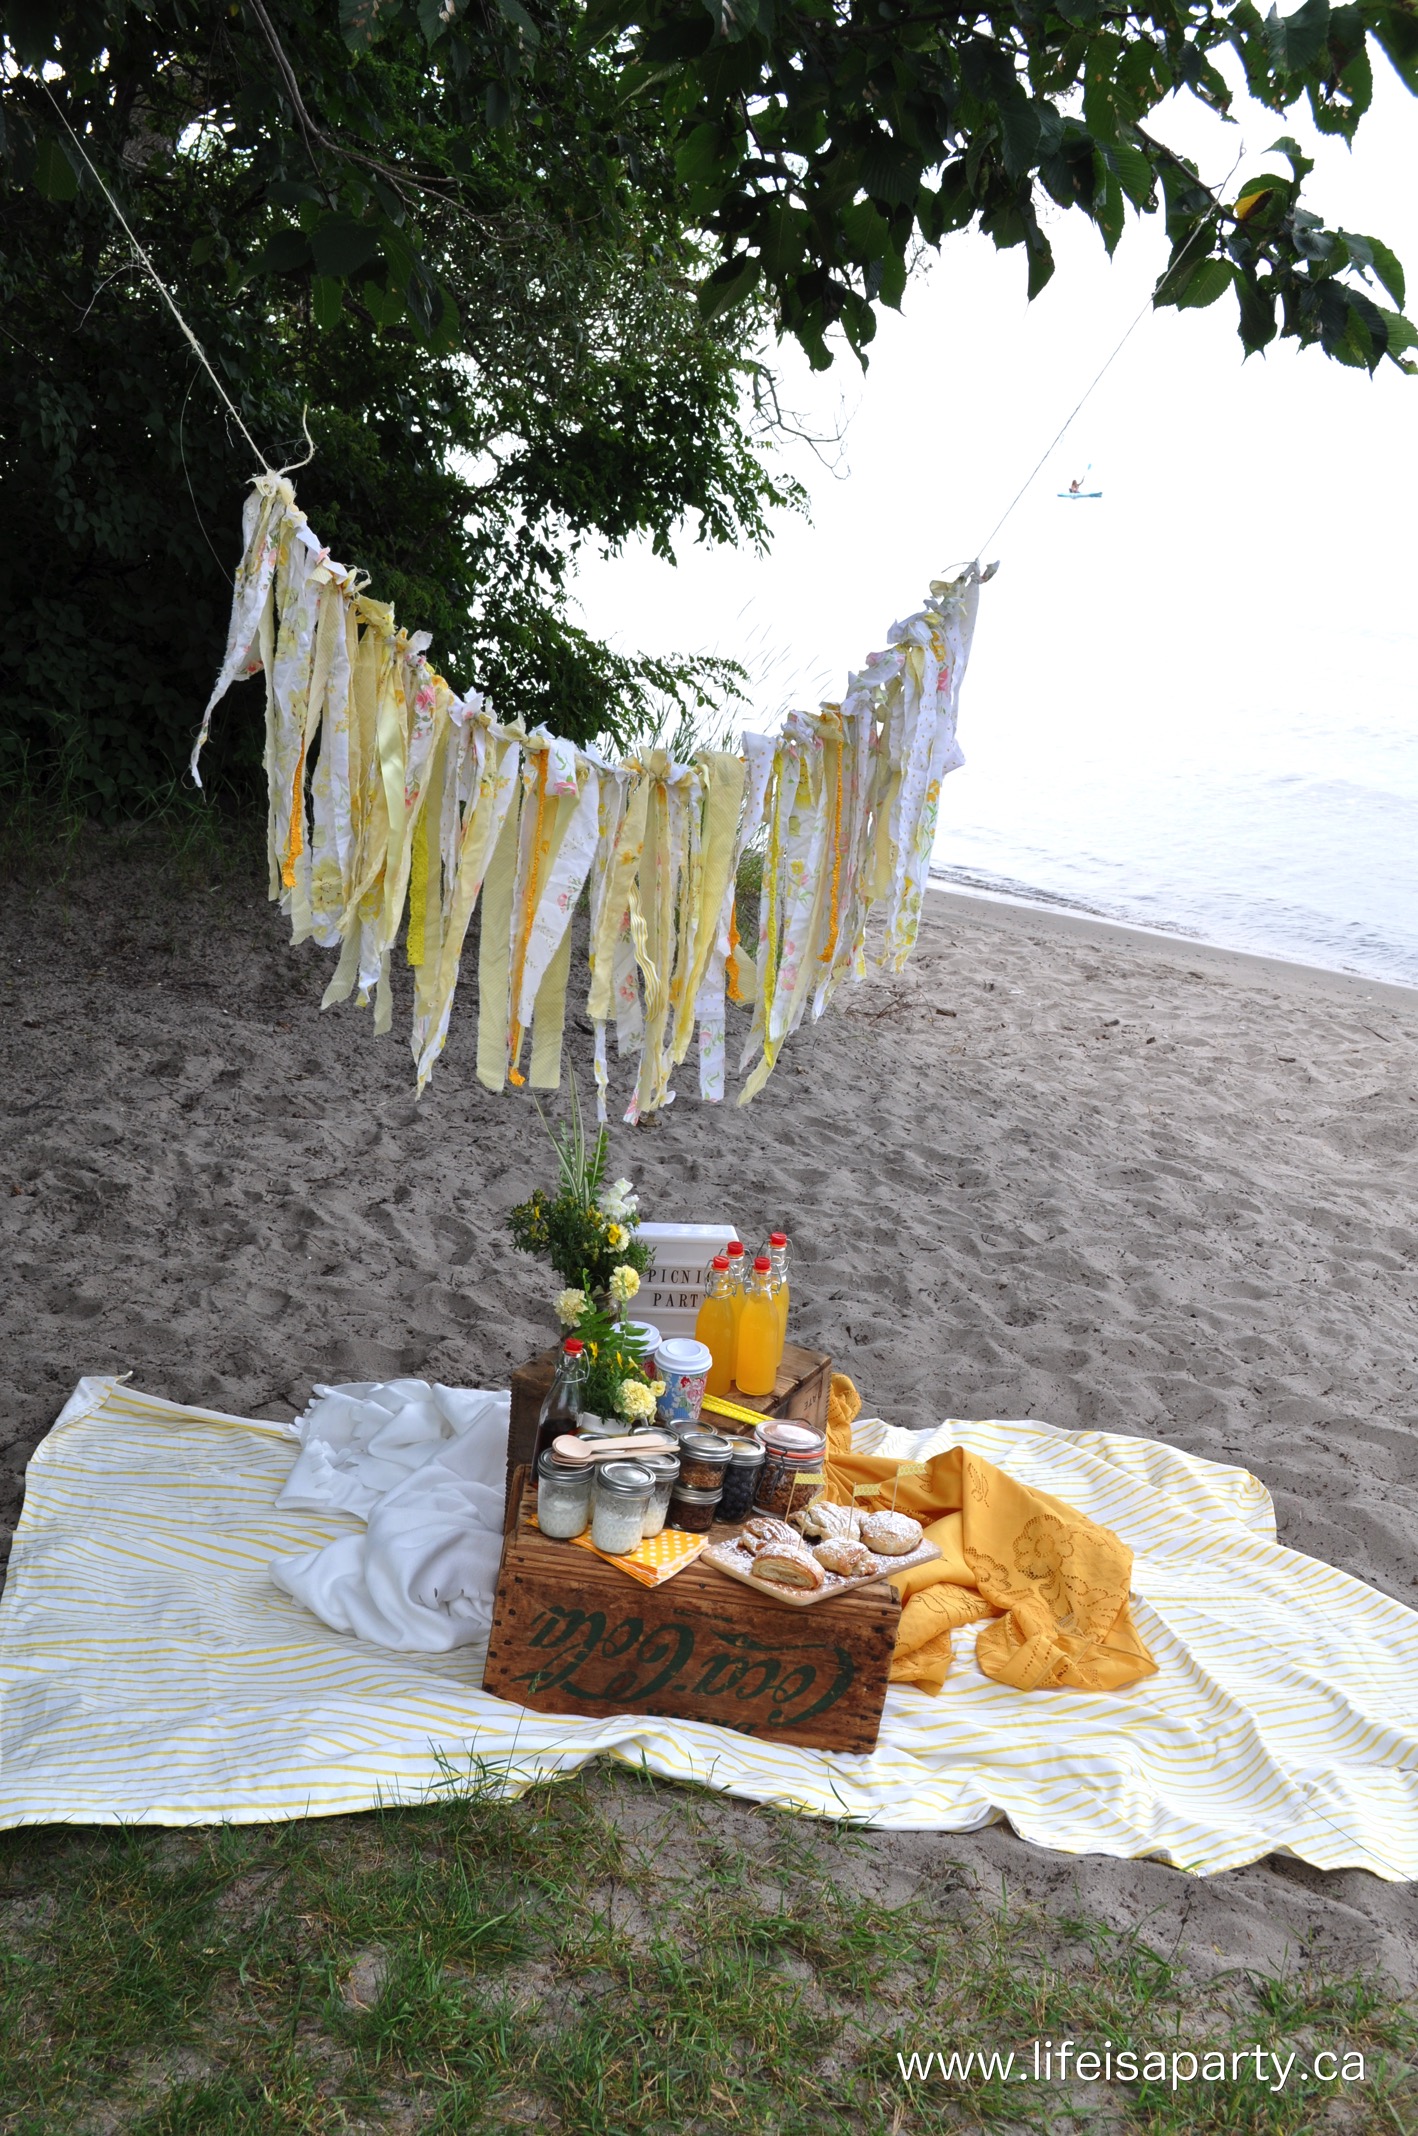 A beautiful breakfast picnic with yellow decor and links to all the recipes including homemade croissants and a yogurt parfait bar!